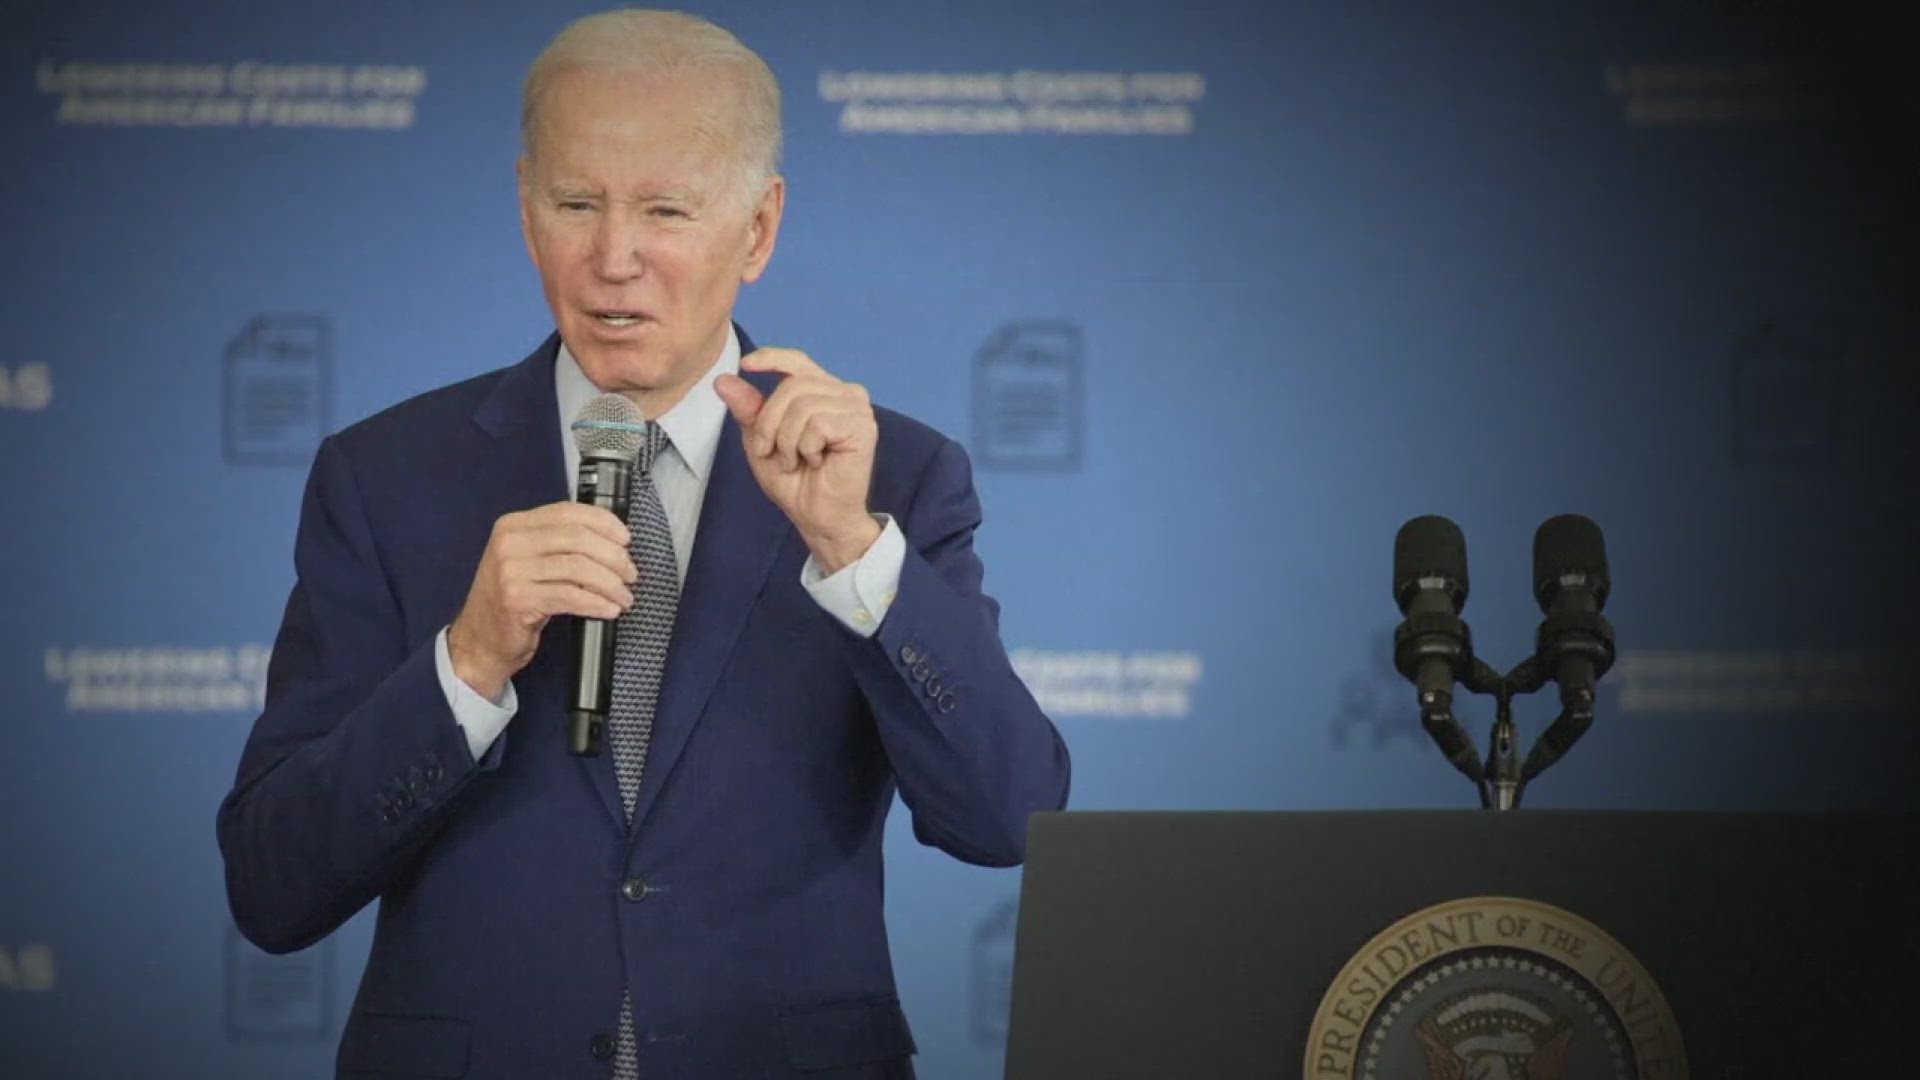 "Congress must act to impose tougher penalties for senior bank executives whose mismanagement contributed to their institutions failing," President Biden said.